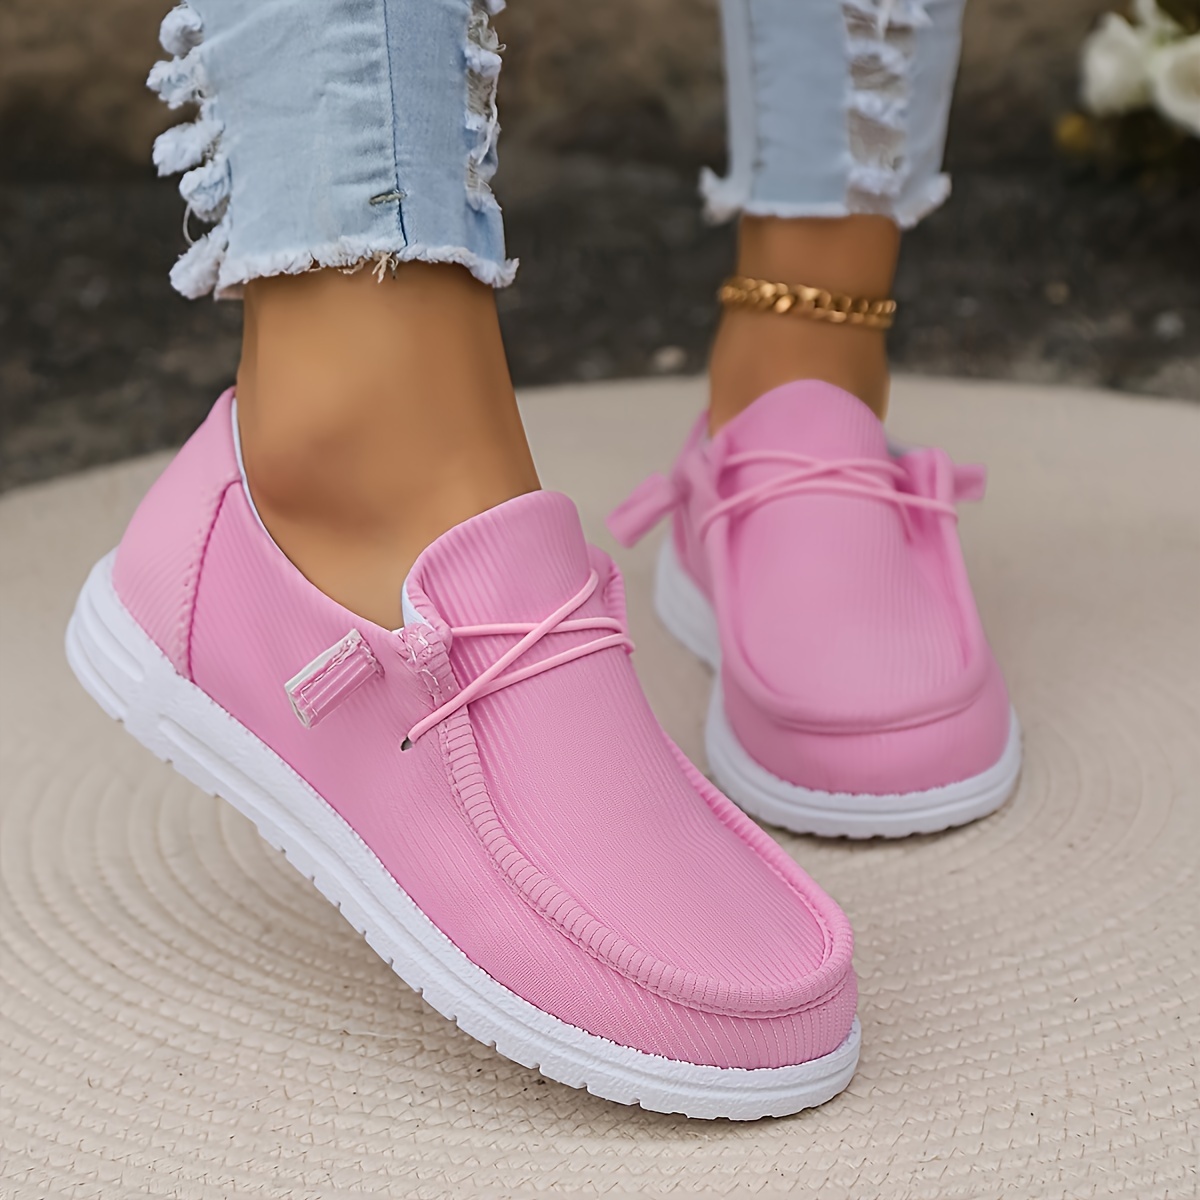 Women s Solid Color Casual Sneakers, Slip On Lightweight Soft Sole Walking Shoes, Low-top Comfort Daily Footwear details 3